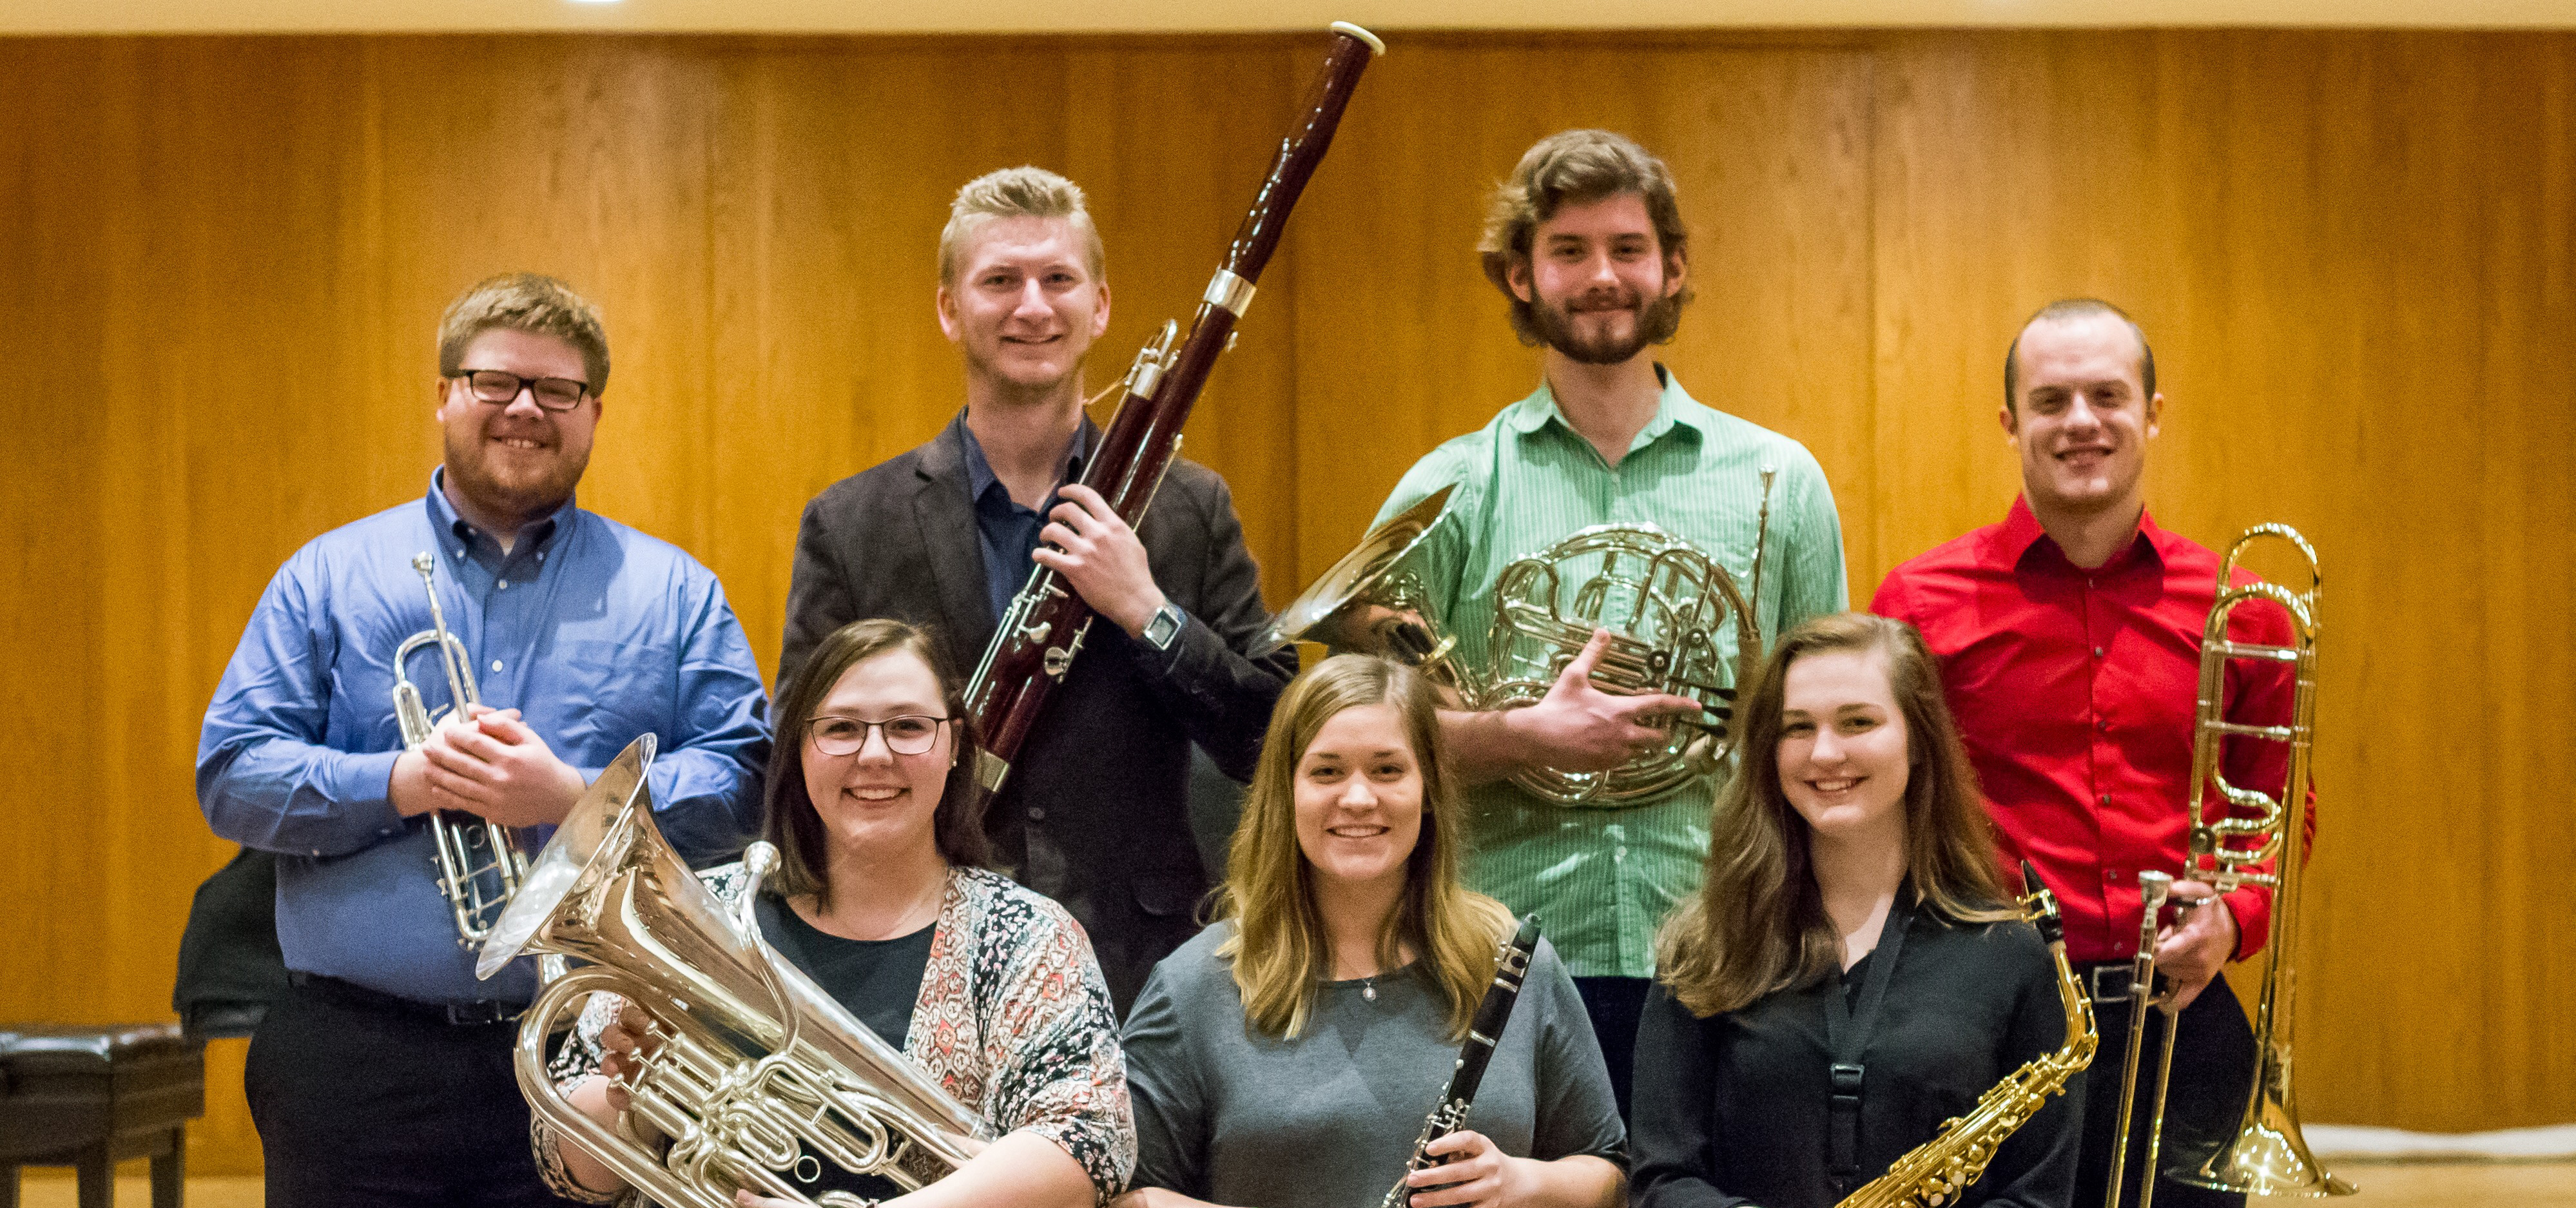 Seven Ouachita Baptist University students recently were selected for the 2017 Arkansas Intercollegiate Band, including: (top row from left) Blake Turner, Wes Savage, Seth Daniell, Jason Potts, (bottom row from left) Rachel Clifton, Ashley Lovely and Morgan Taylor.